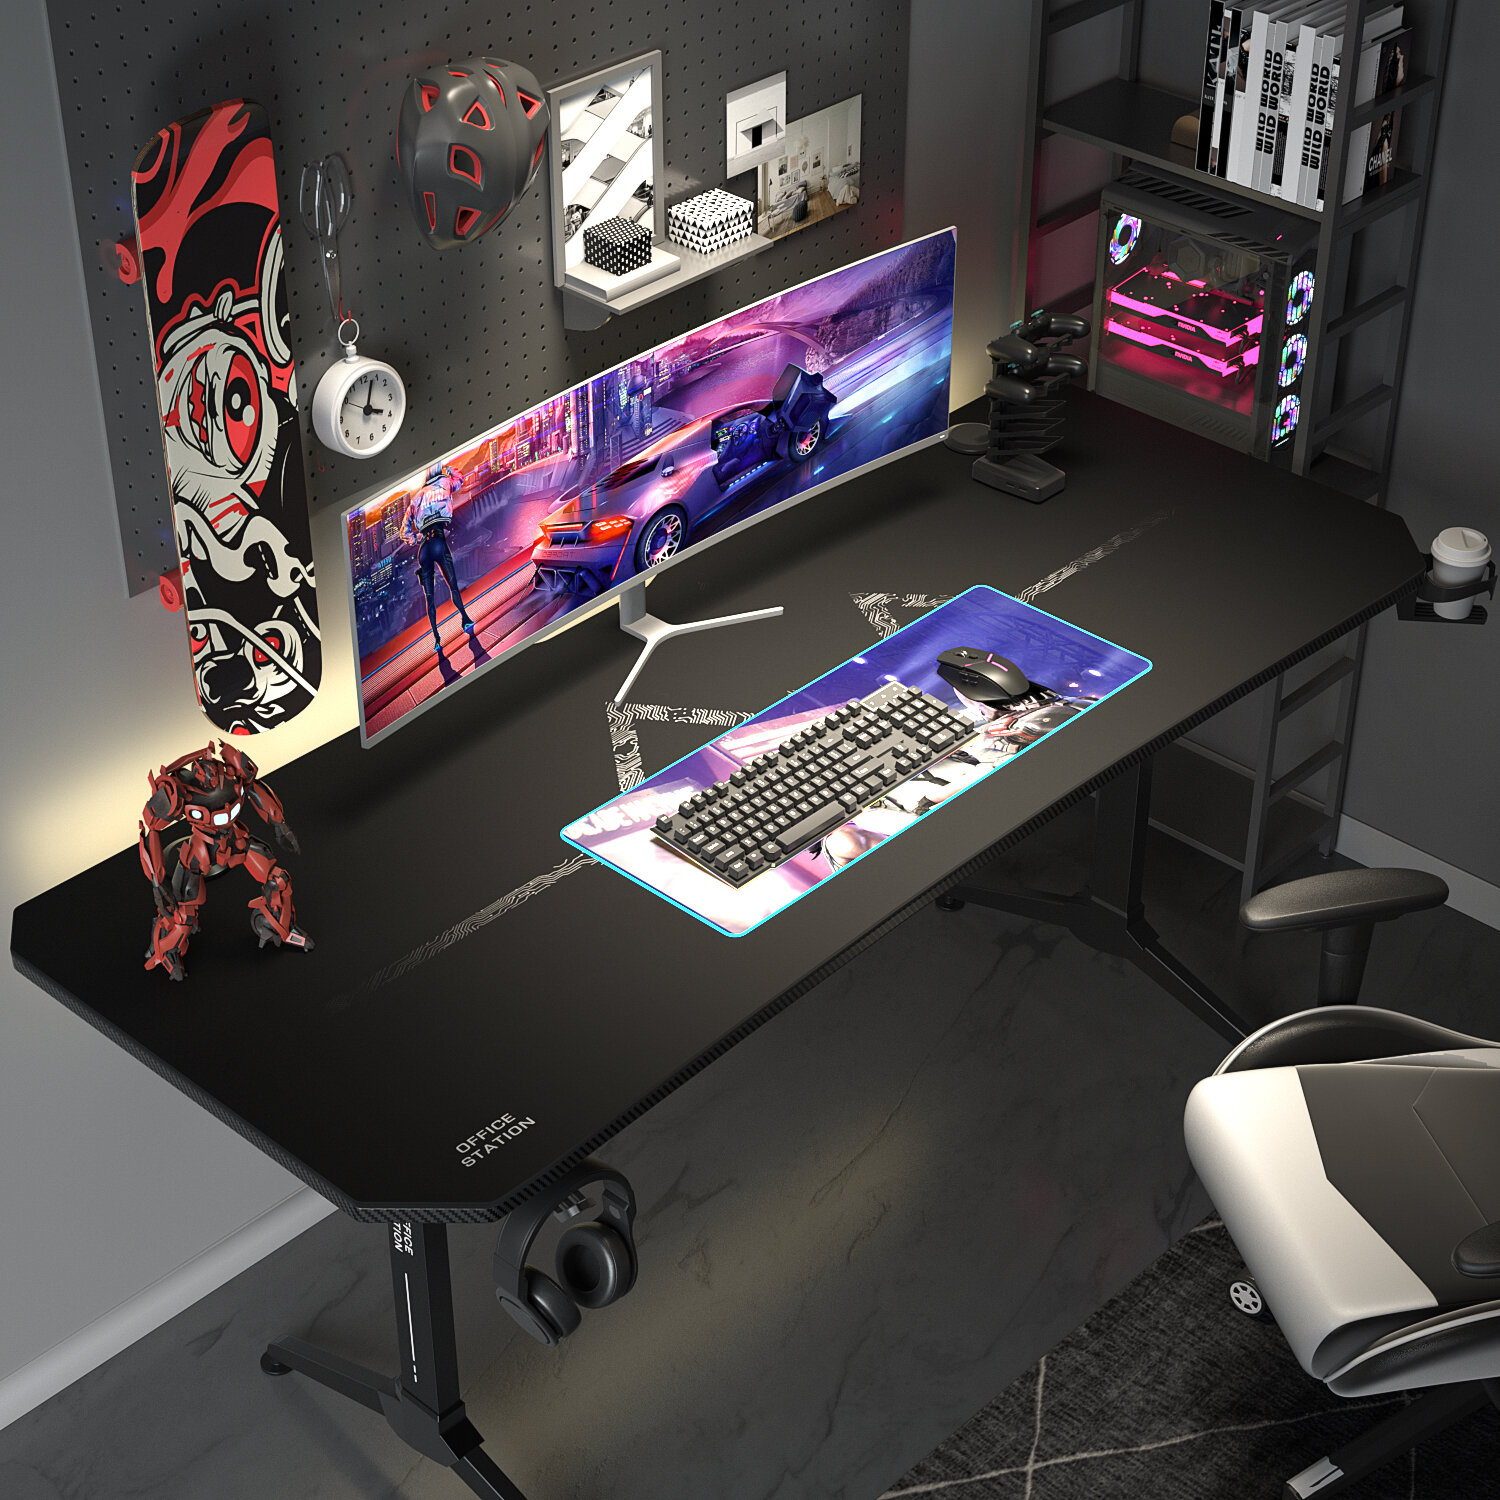 Black Gaming Desk with Cup Holder/Headphone Hook/2 Wire Management Holes &  Black Reclining Back/